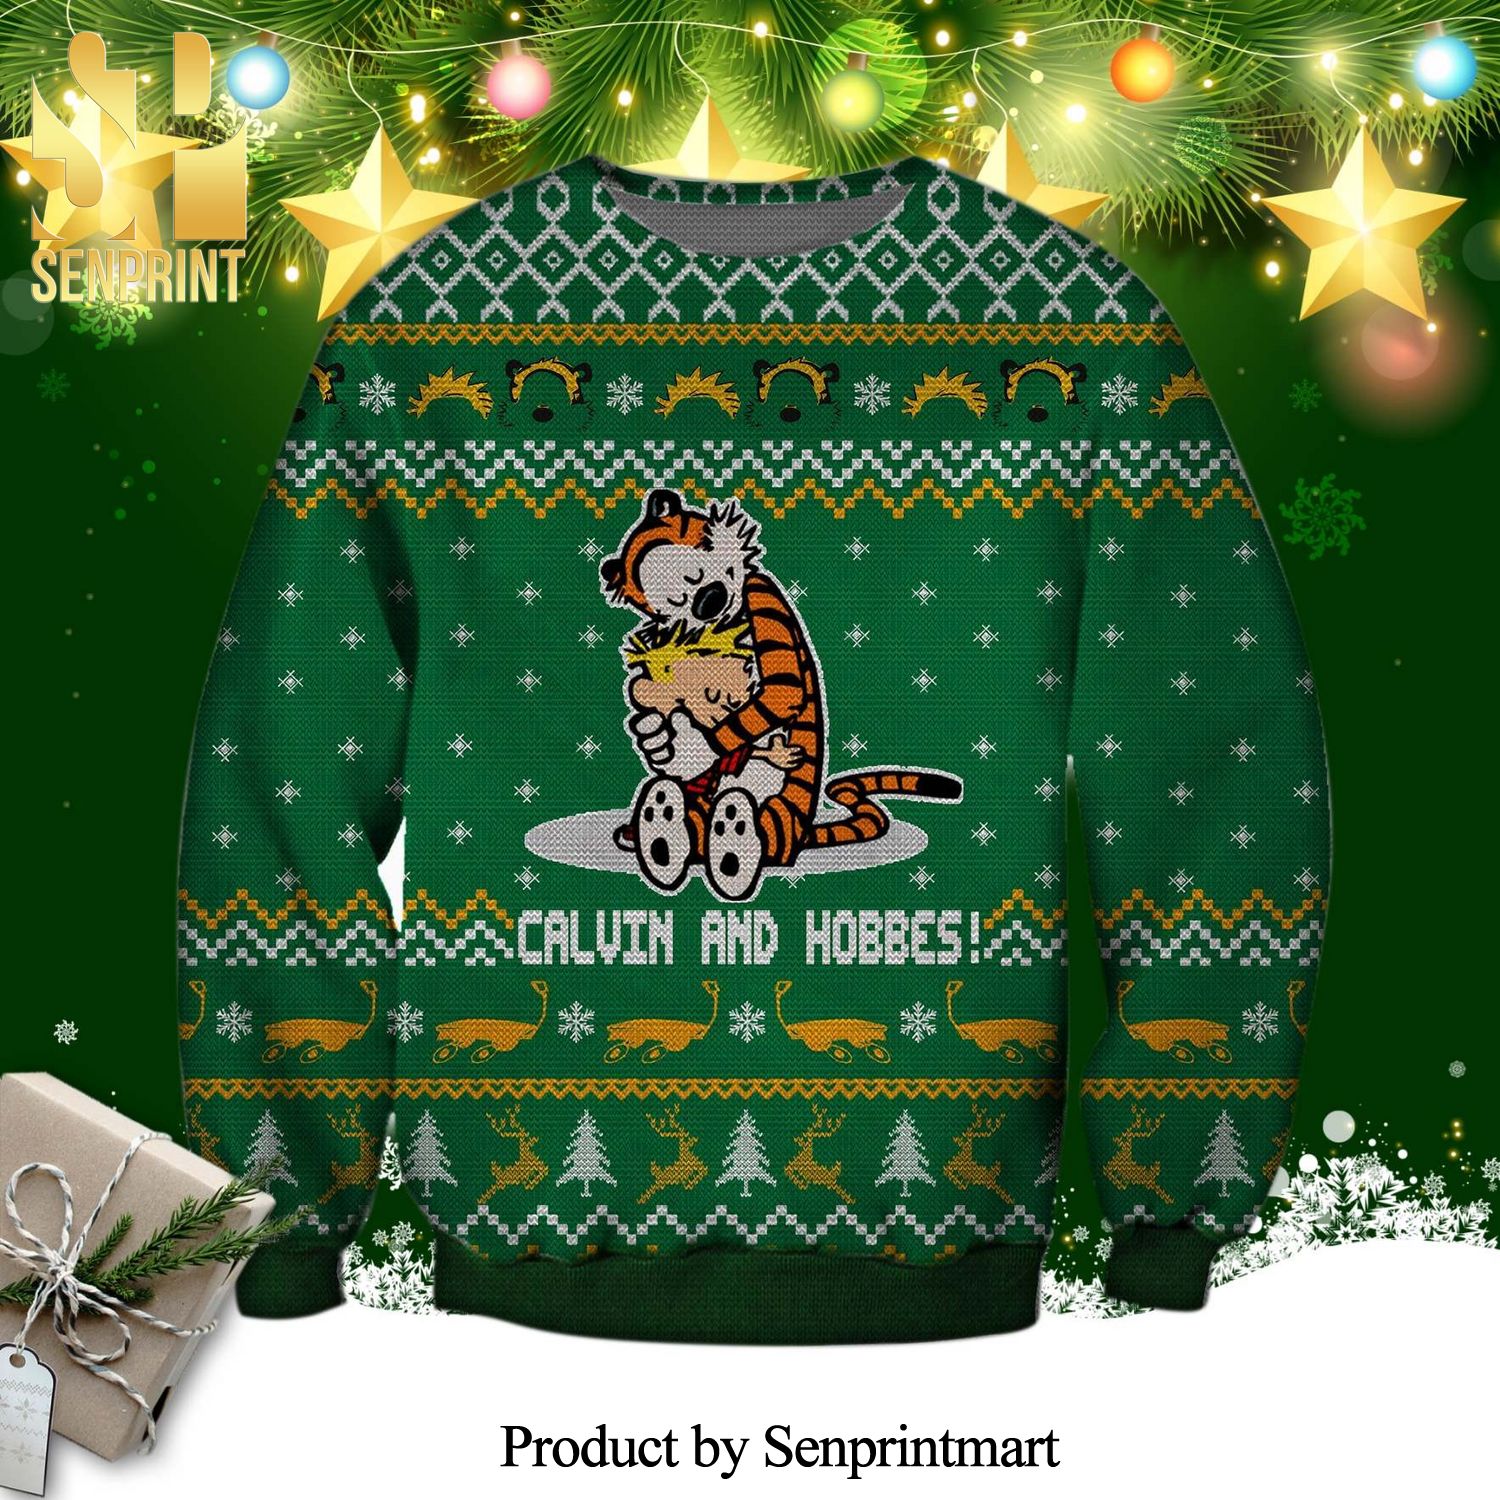 Calvin And Hobbes Daily Comic Strip Knitted Ugly Christmas Sweater